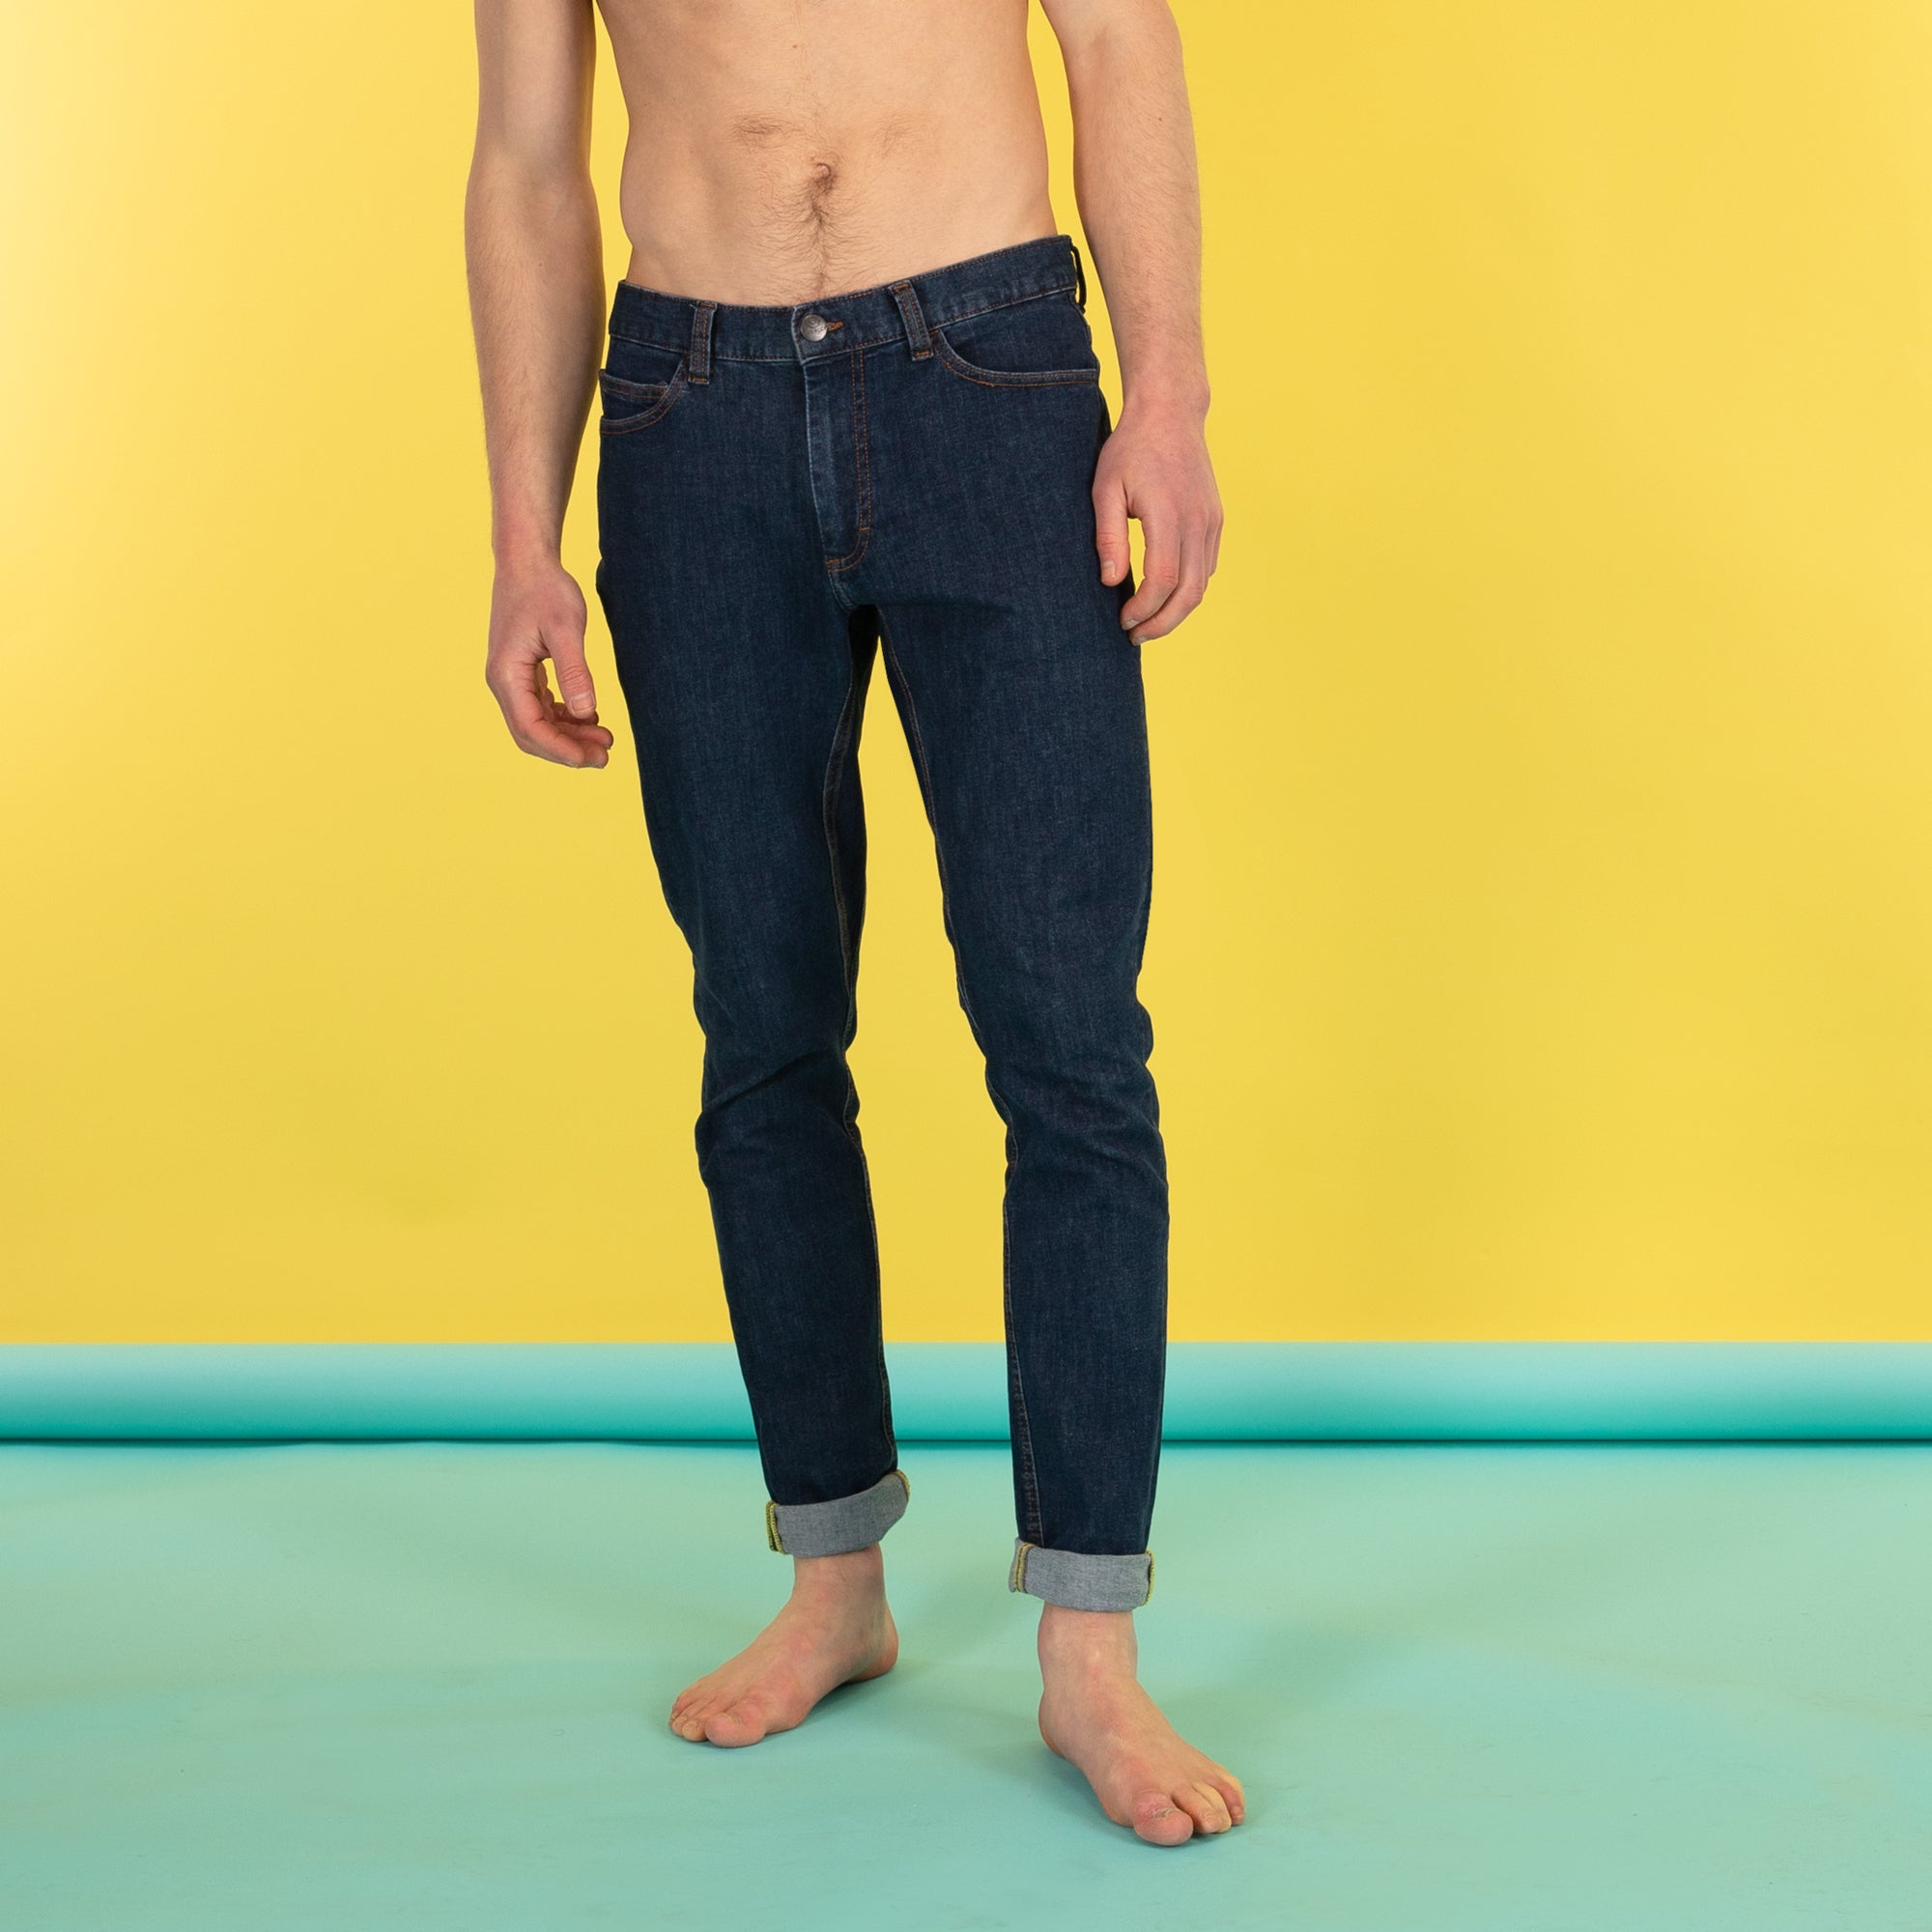 FITZ RAW WASH Jeans | Slim Fit with Super Stretch | 3RD ROCK Clothing - Buy Fitz Jeans for Men